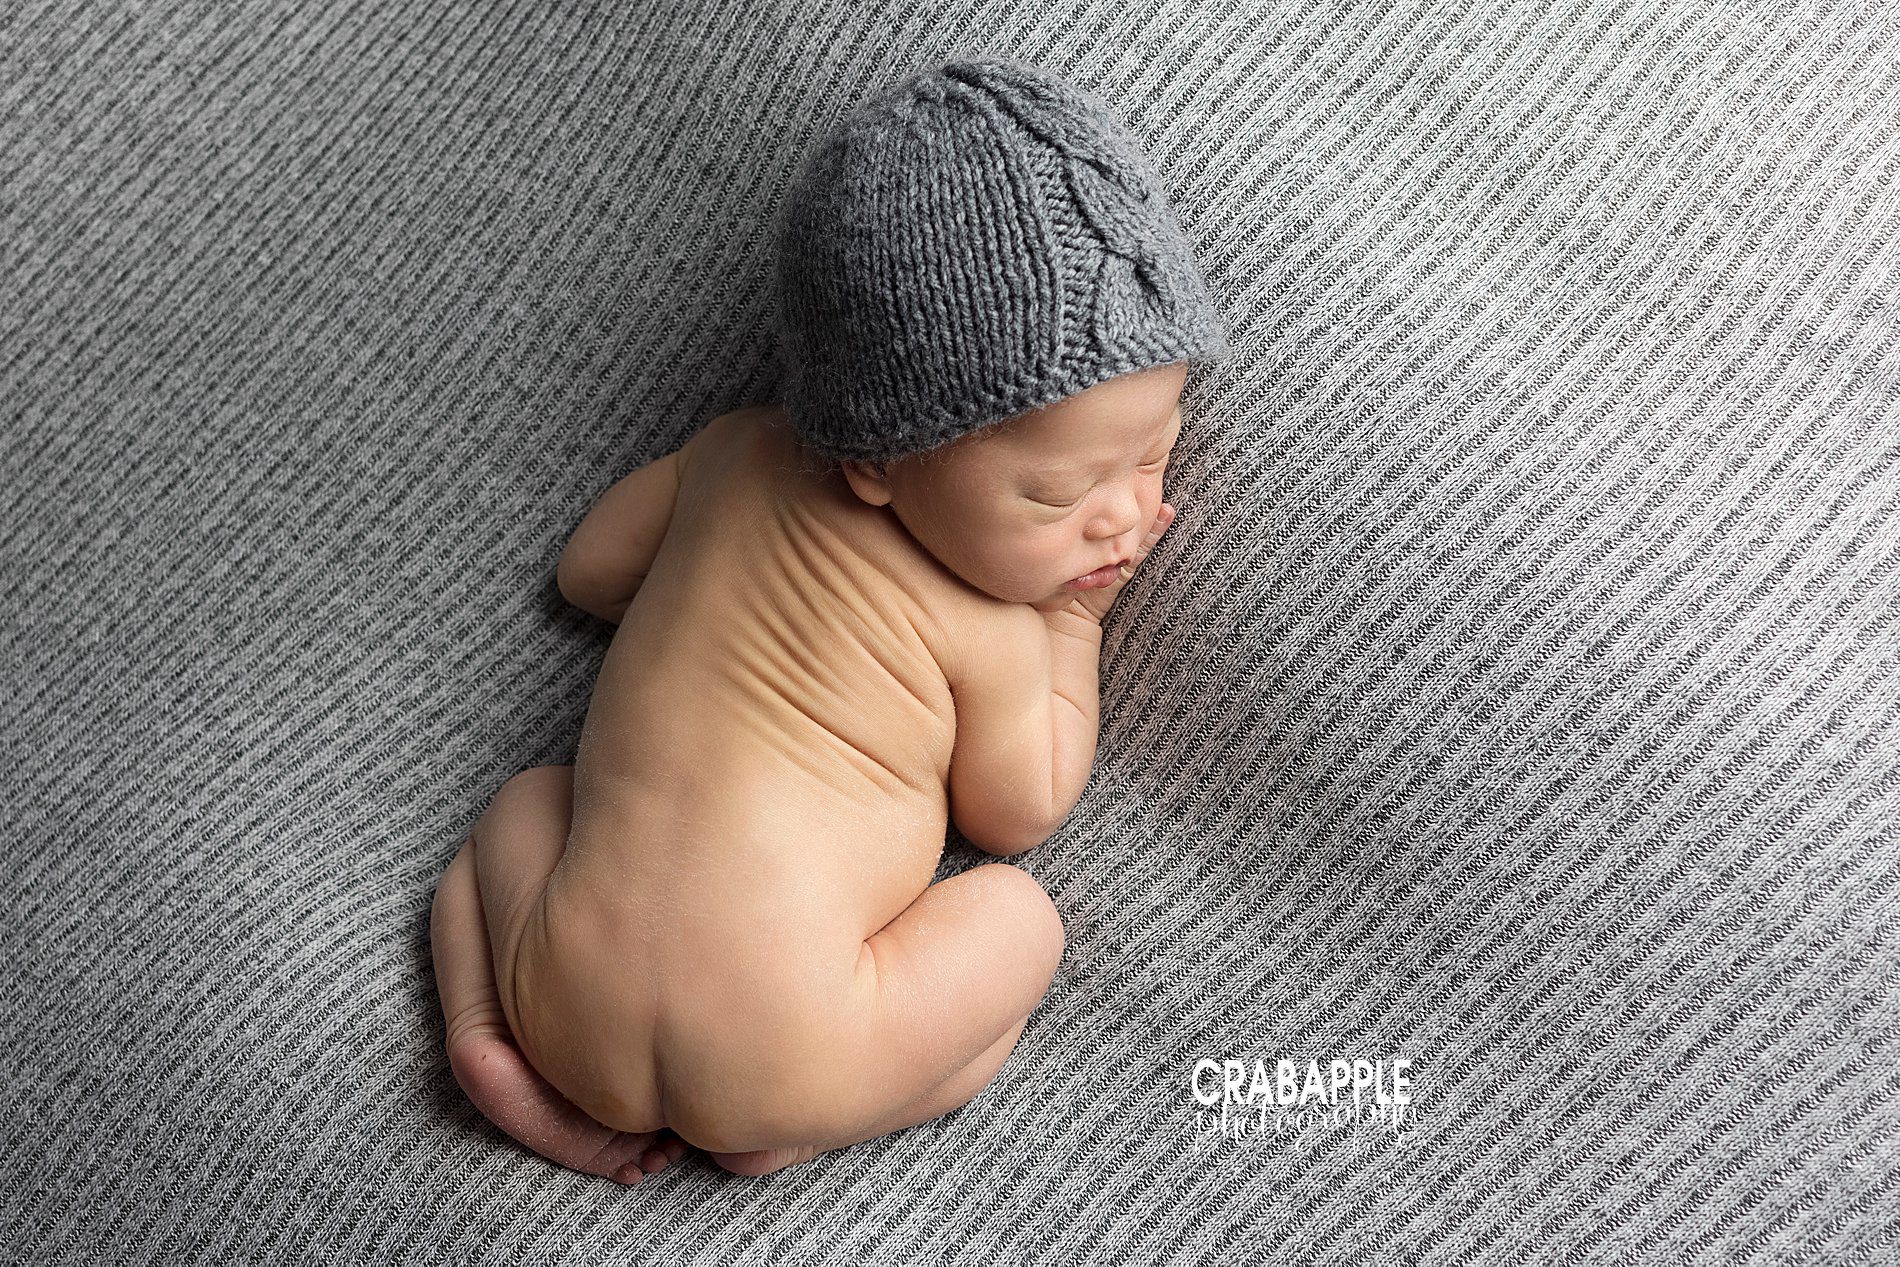 Simple and soft newborn photo ideas of newborn baby boy on his tummy on a gray blanket wearing a gray knit hat taken from above.